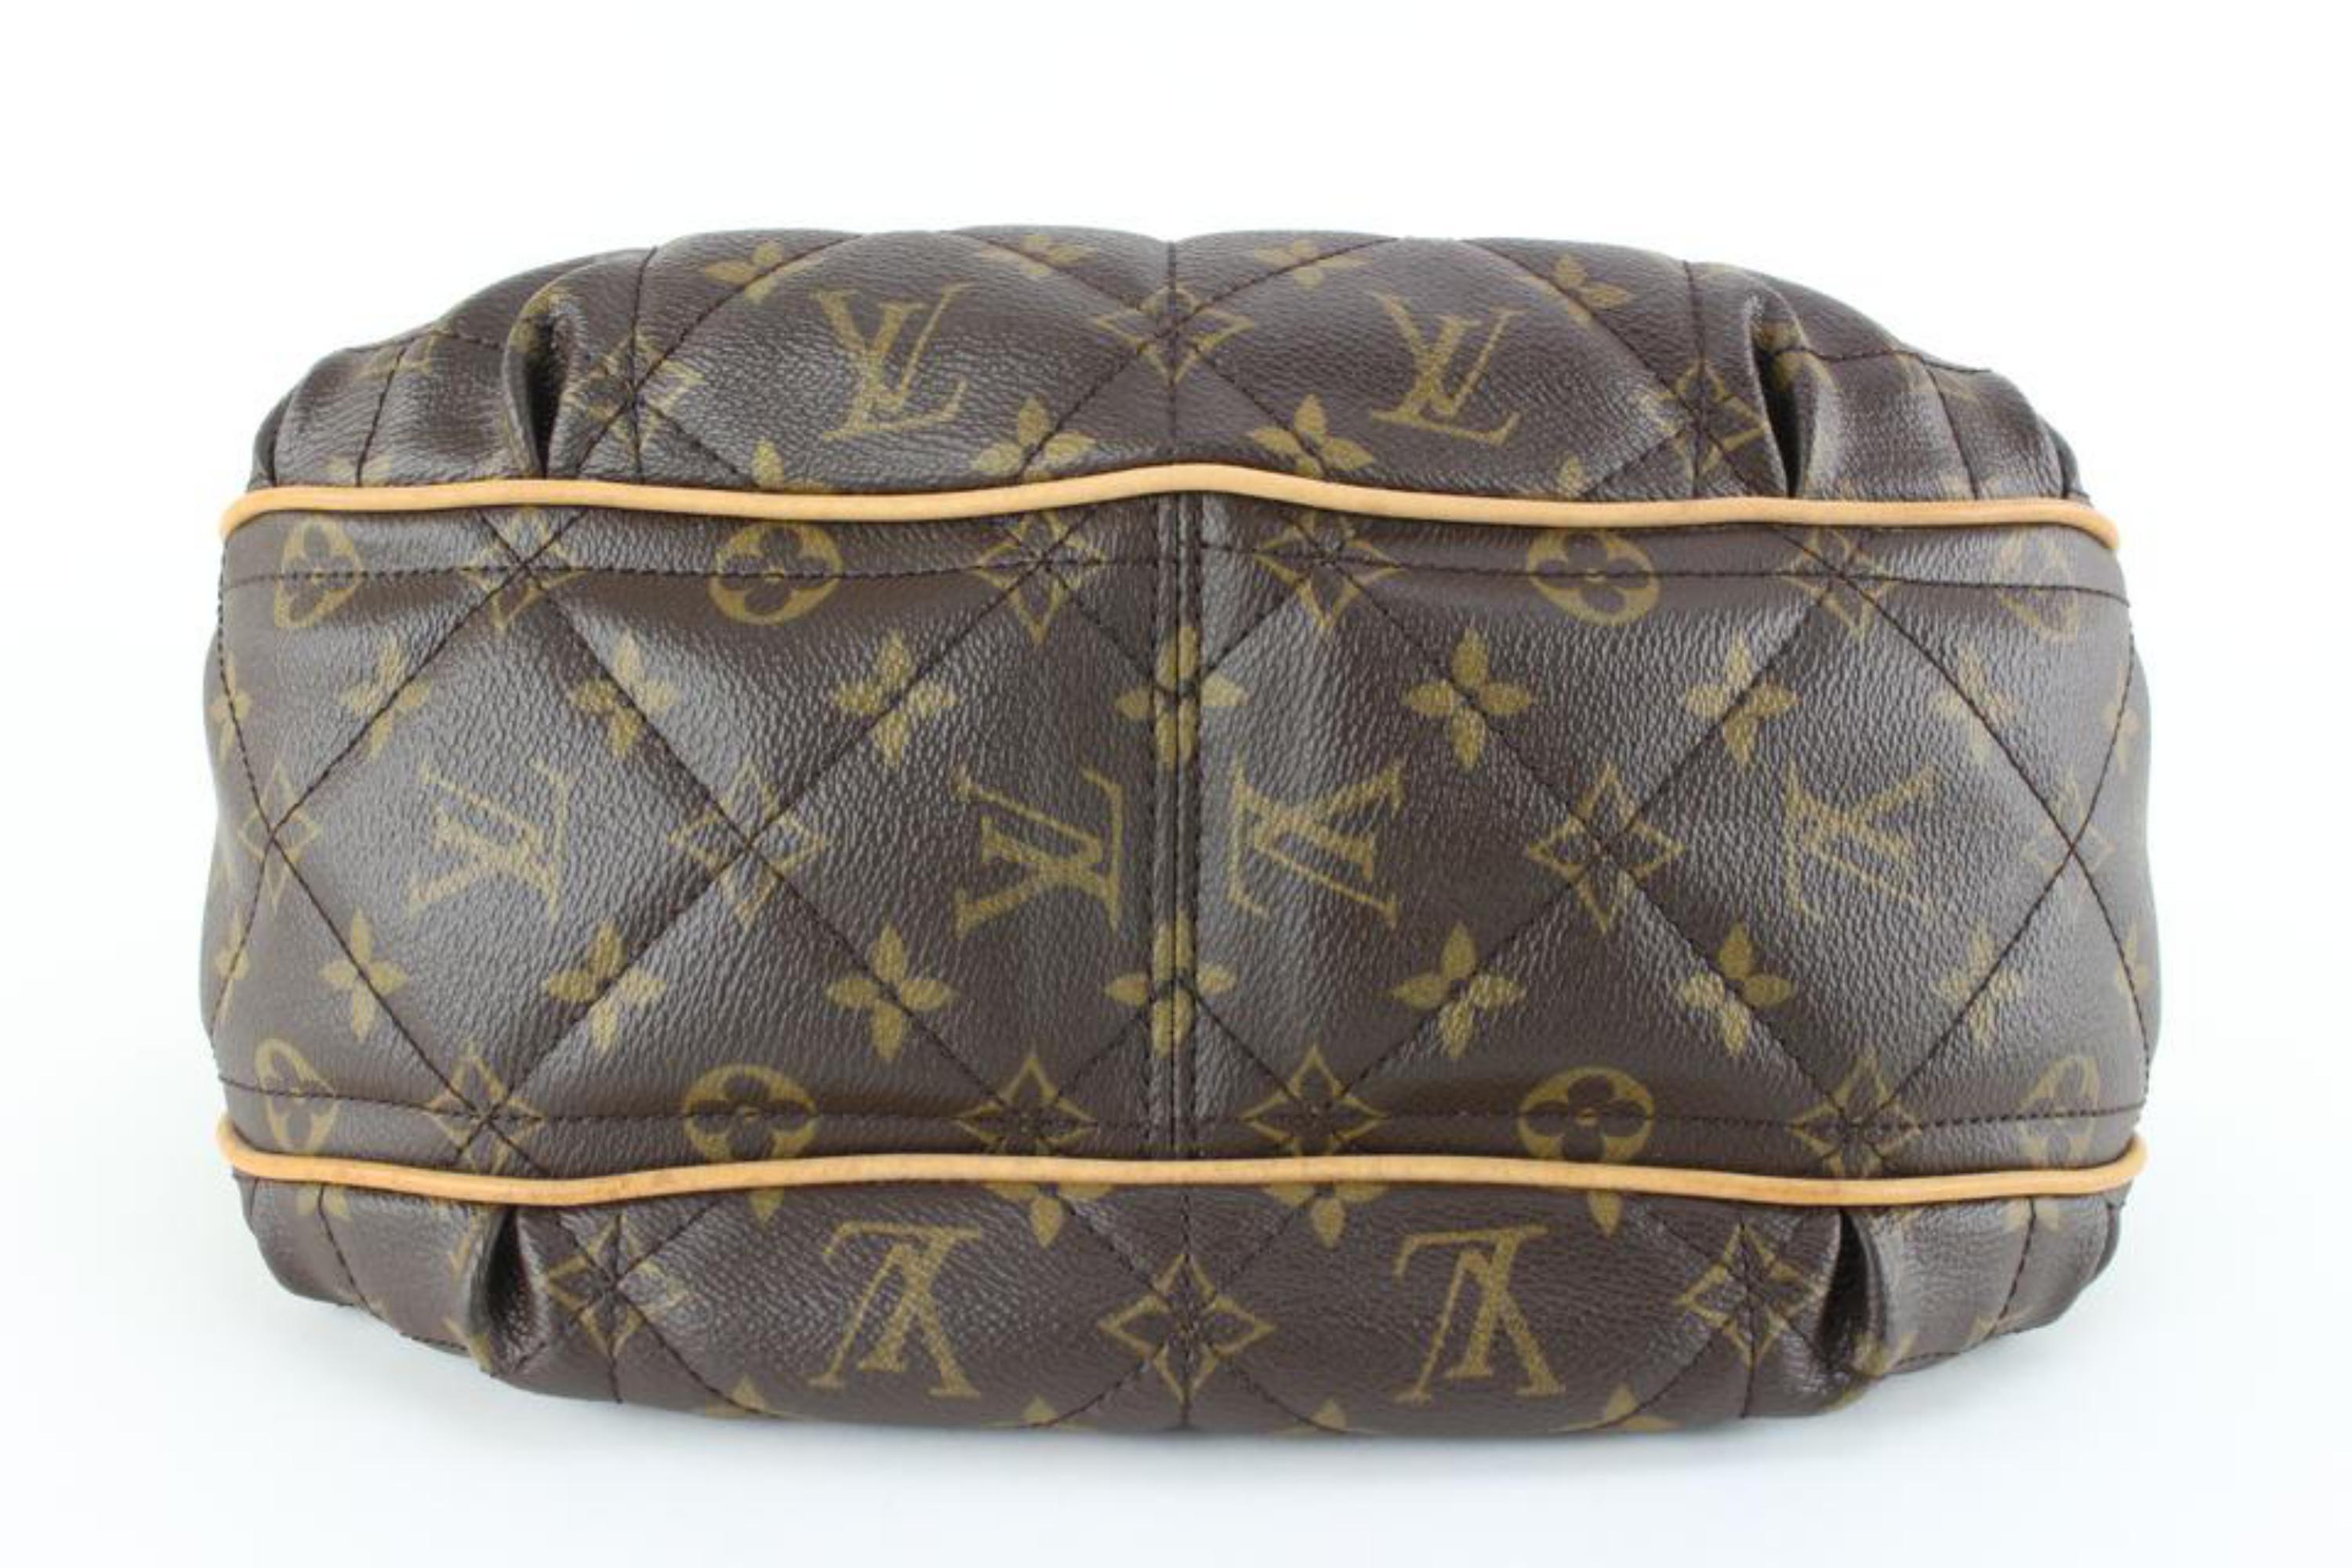 Brown Louis Vuitton Limited Edition Quilted Monogram Etoile City PM Hobo Bag 21lk830s